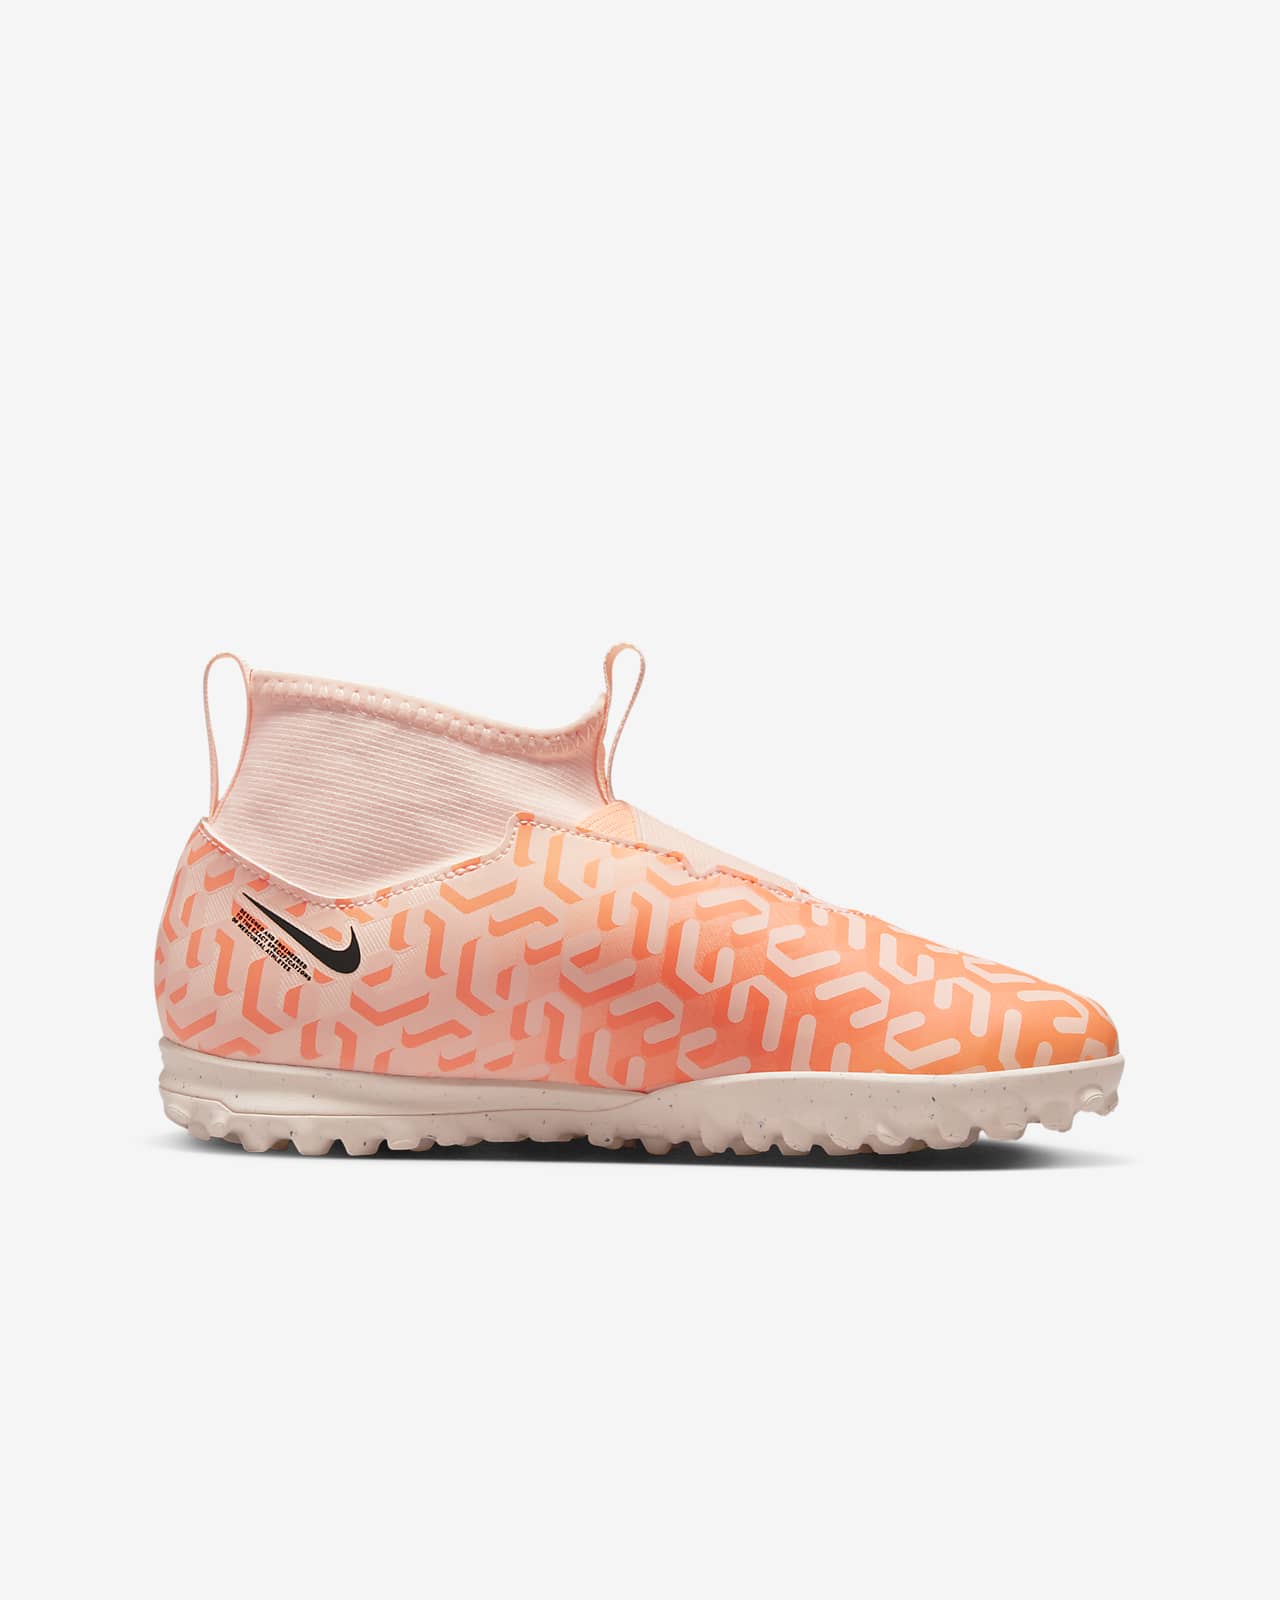 Women and Kids in Unique Offers (7), nike mercurial turf shoes